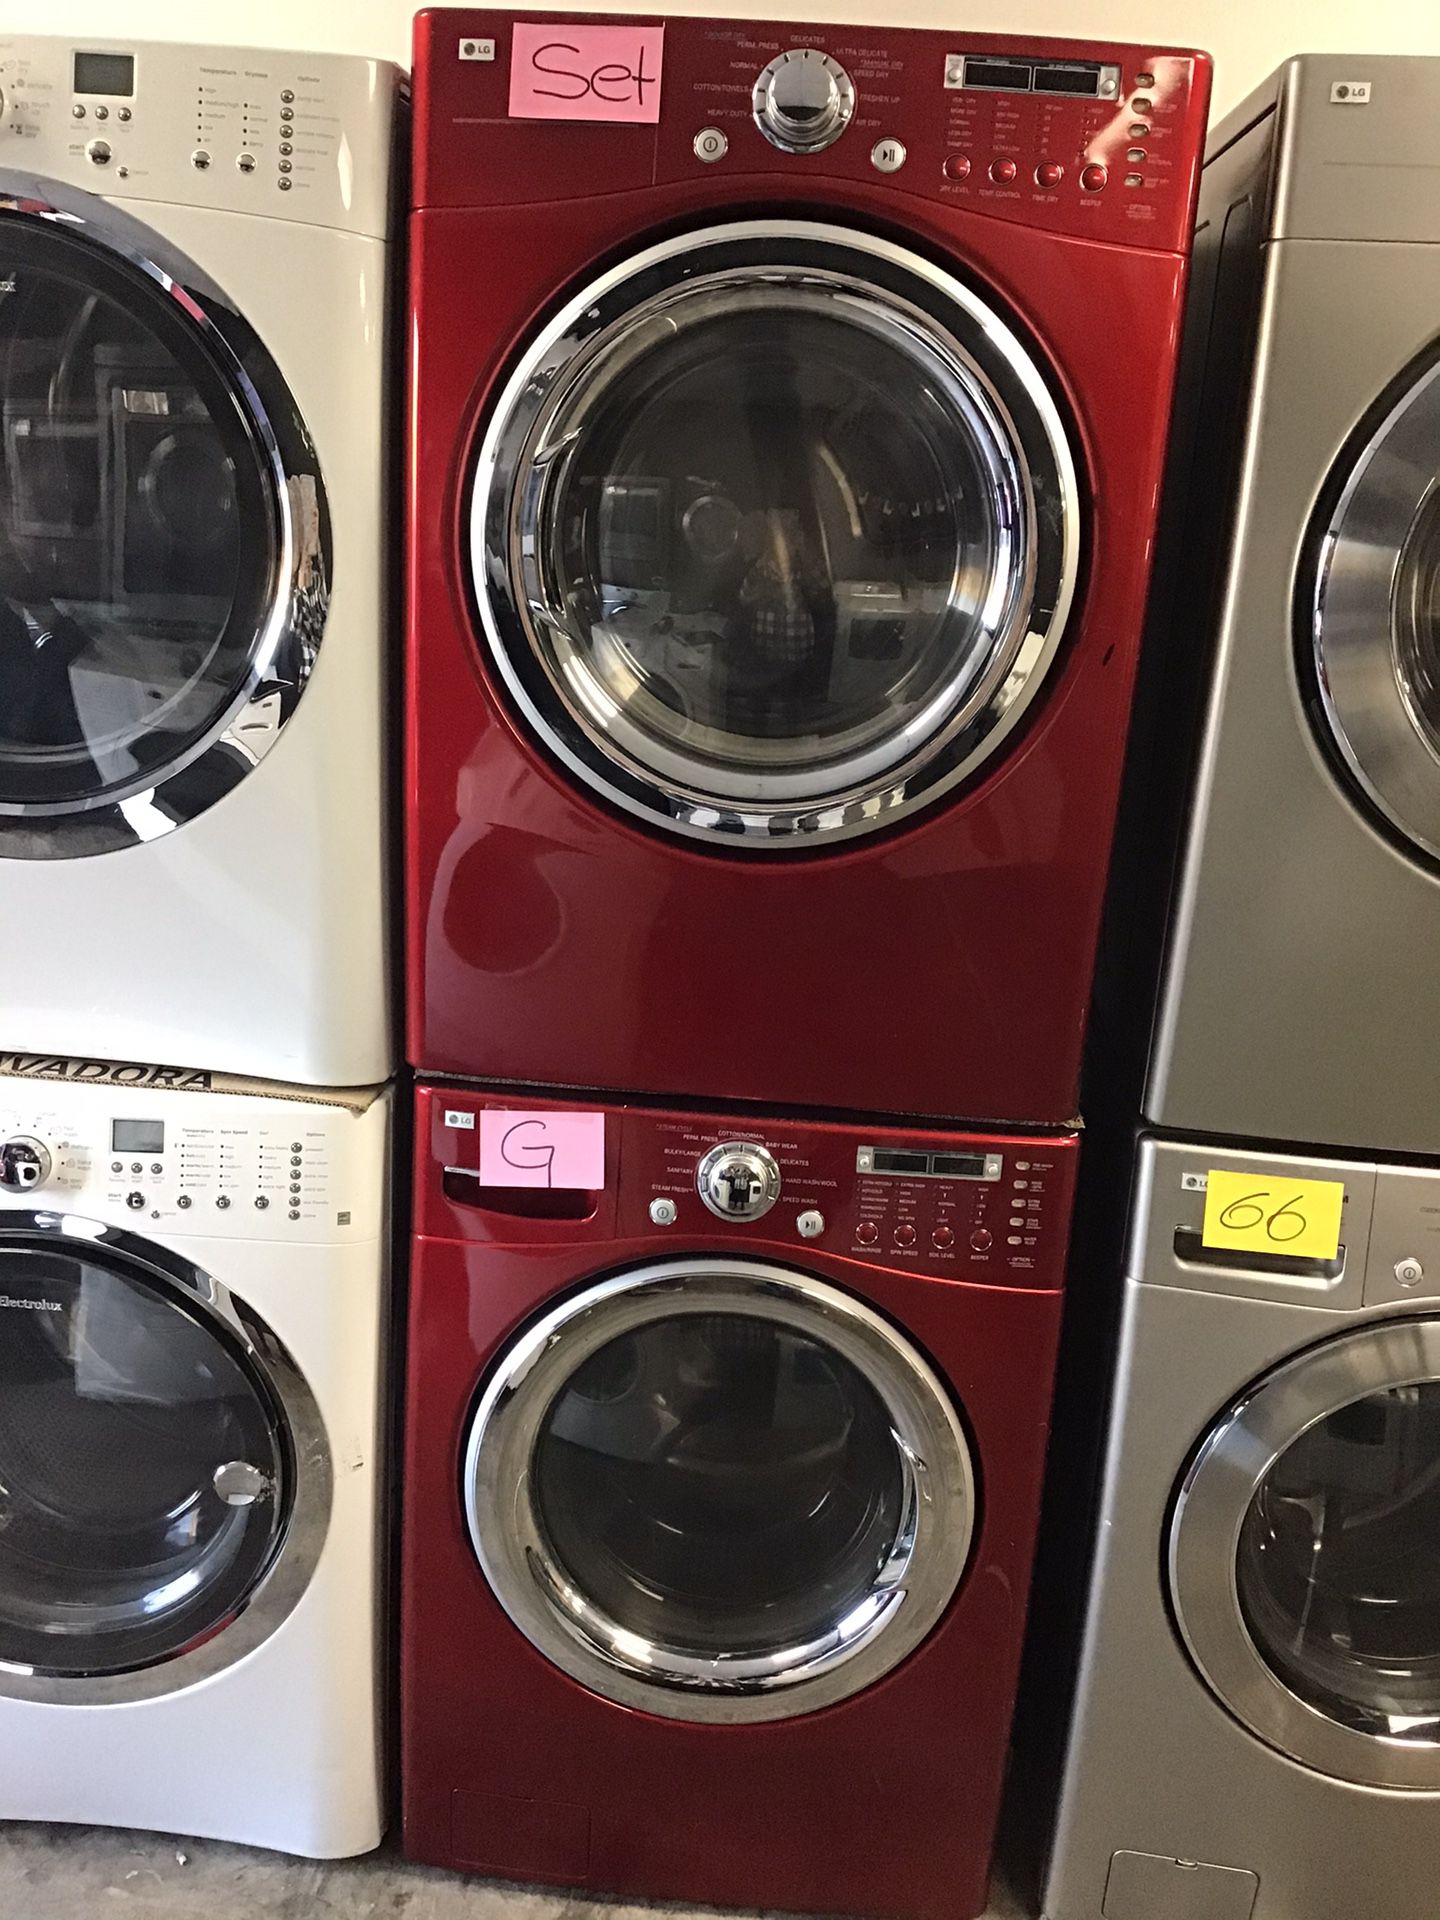 Set washer and dryer gas